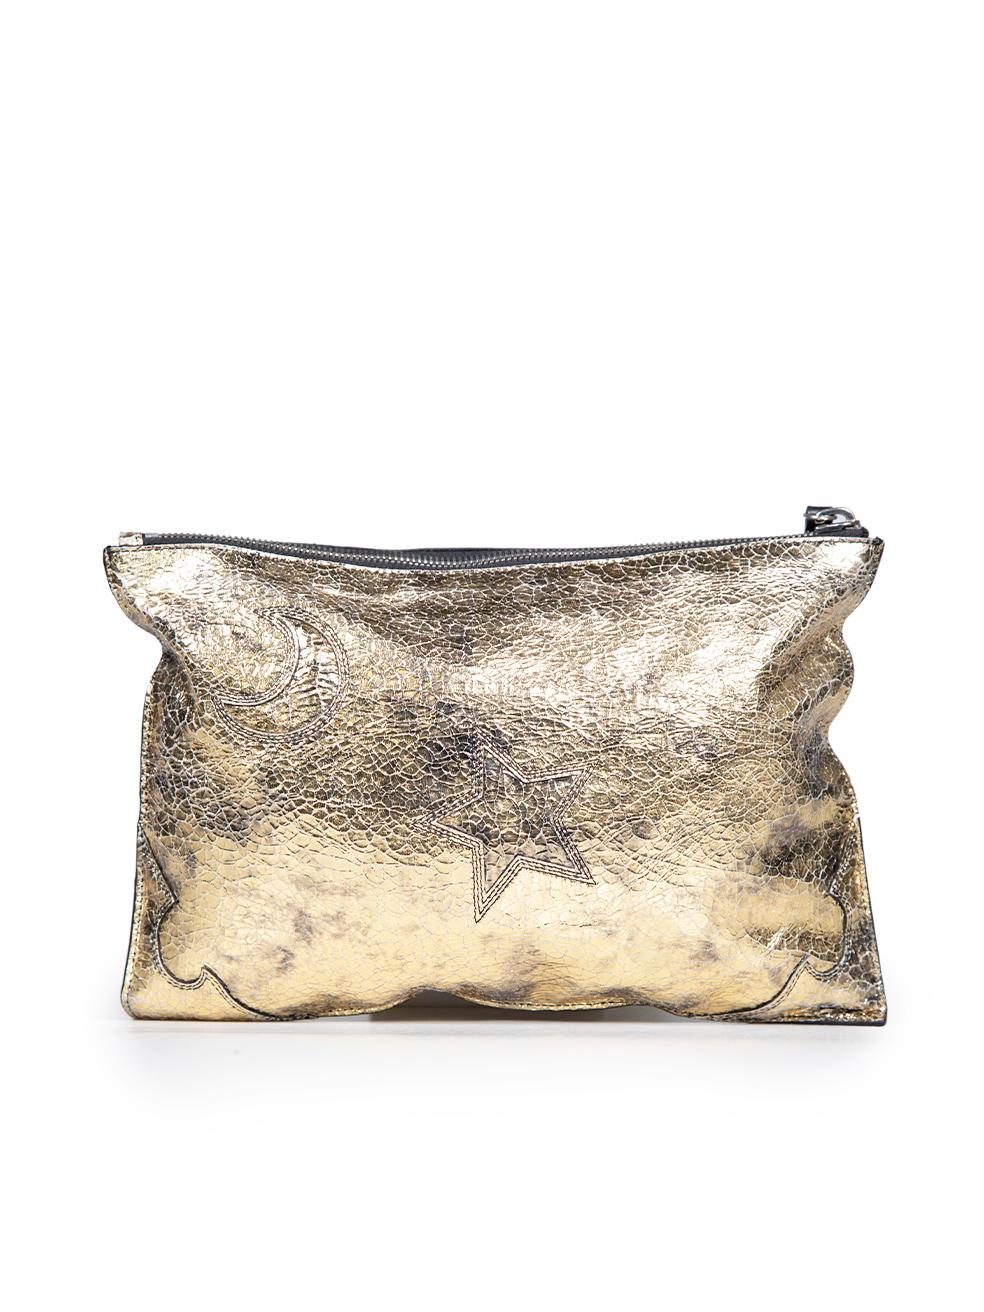 Alexander McQueen Gold Crinkle Wristlet Clutch In Excellent Condition In London, GB